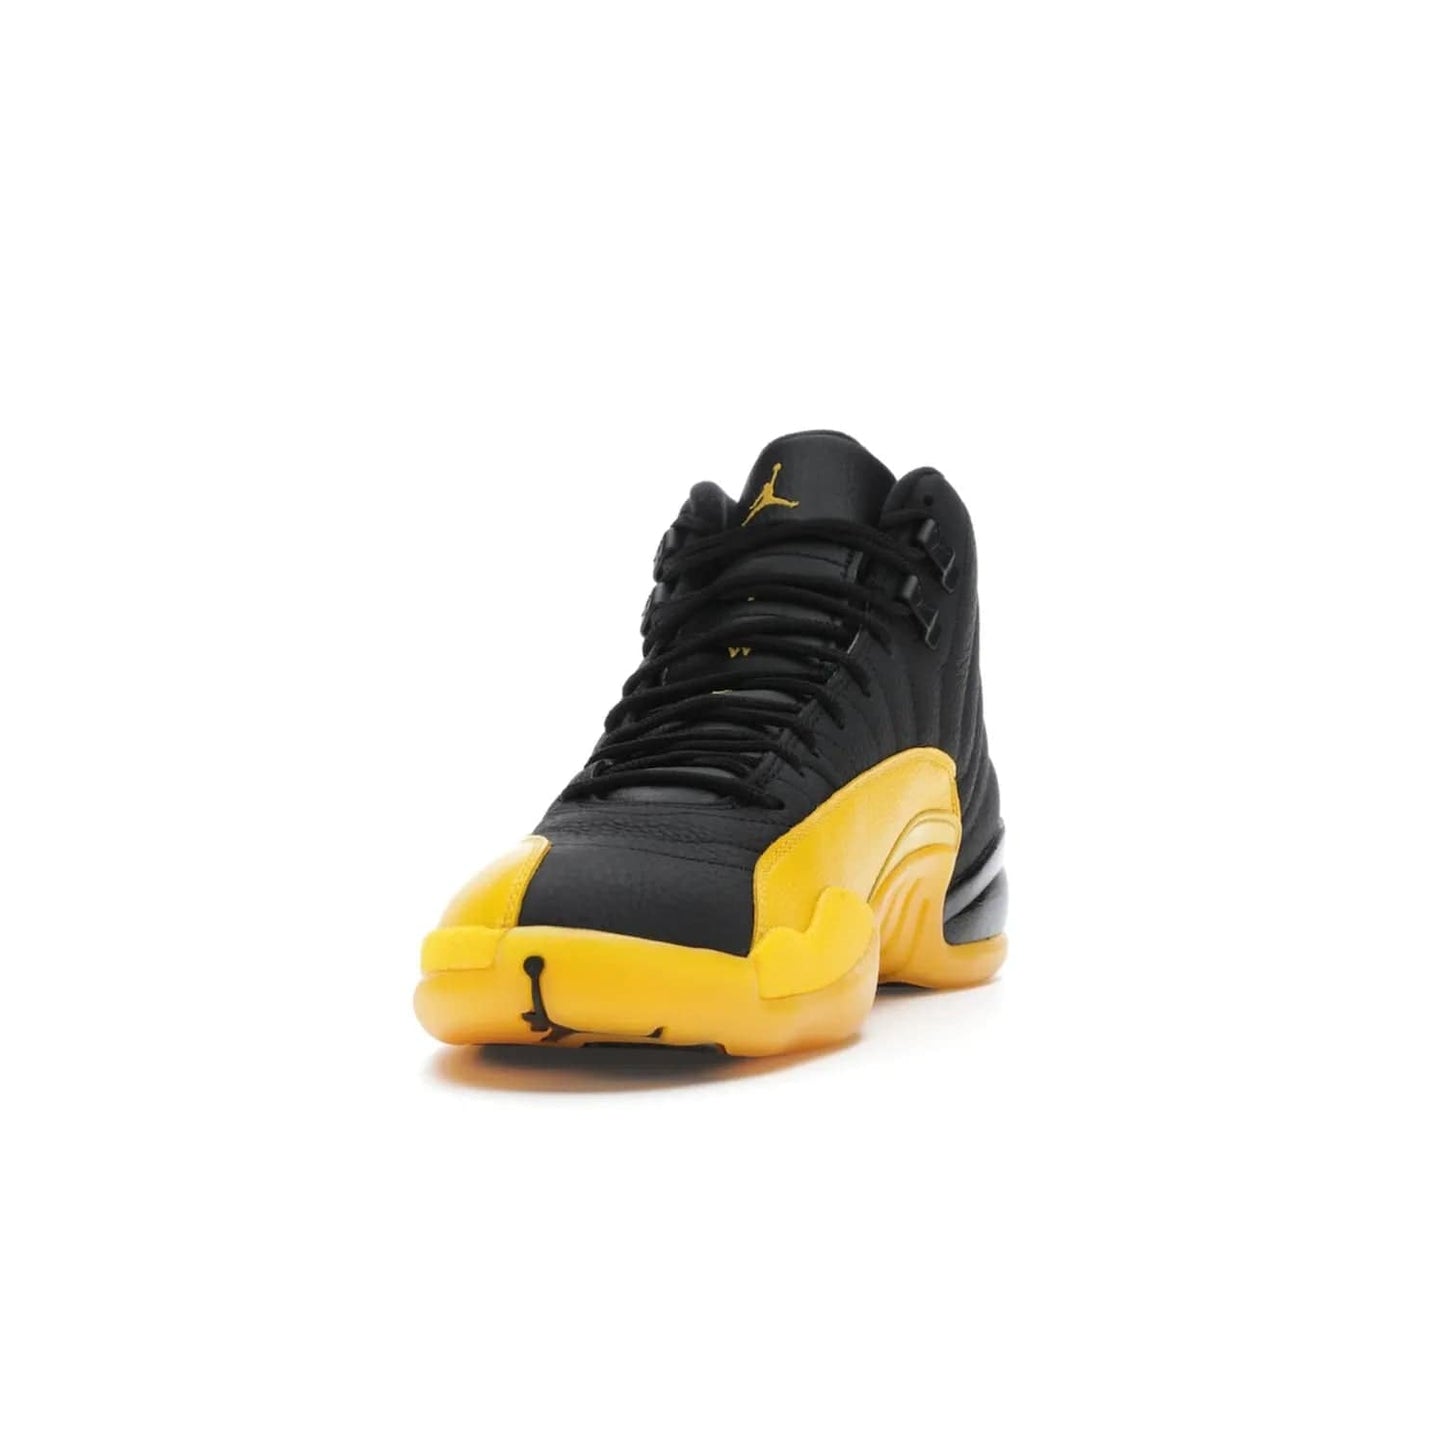 Jordan 12 Retro Black University Gold - Image 12 - Only at www.BallersClubKickz.com - This Jordan 12 Retro features a black tumbled leather upper and University Gold accents for a modern twist. Boasting Jordan "Two Three" branding and a yellow sole, these shoes will elevate your wardrobe. Fresh, sleek, and one of a kind - the Jordan 12 University Gold is your summer sneaker.